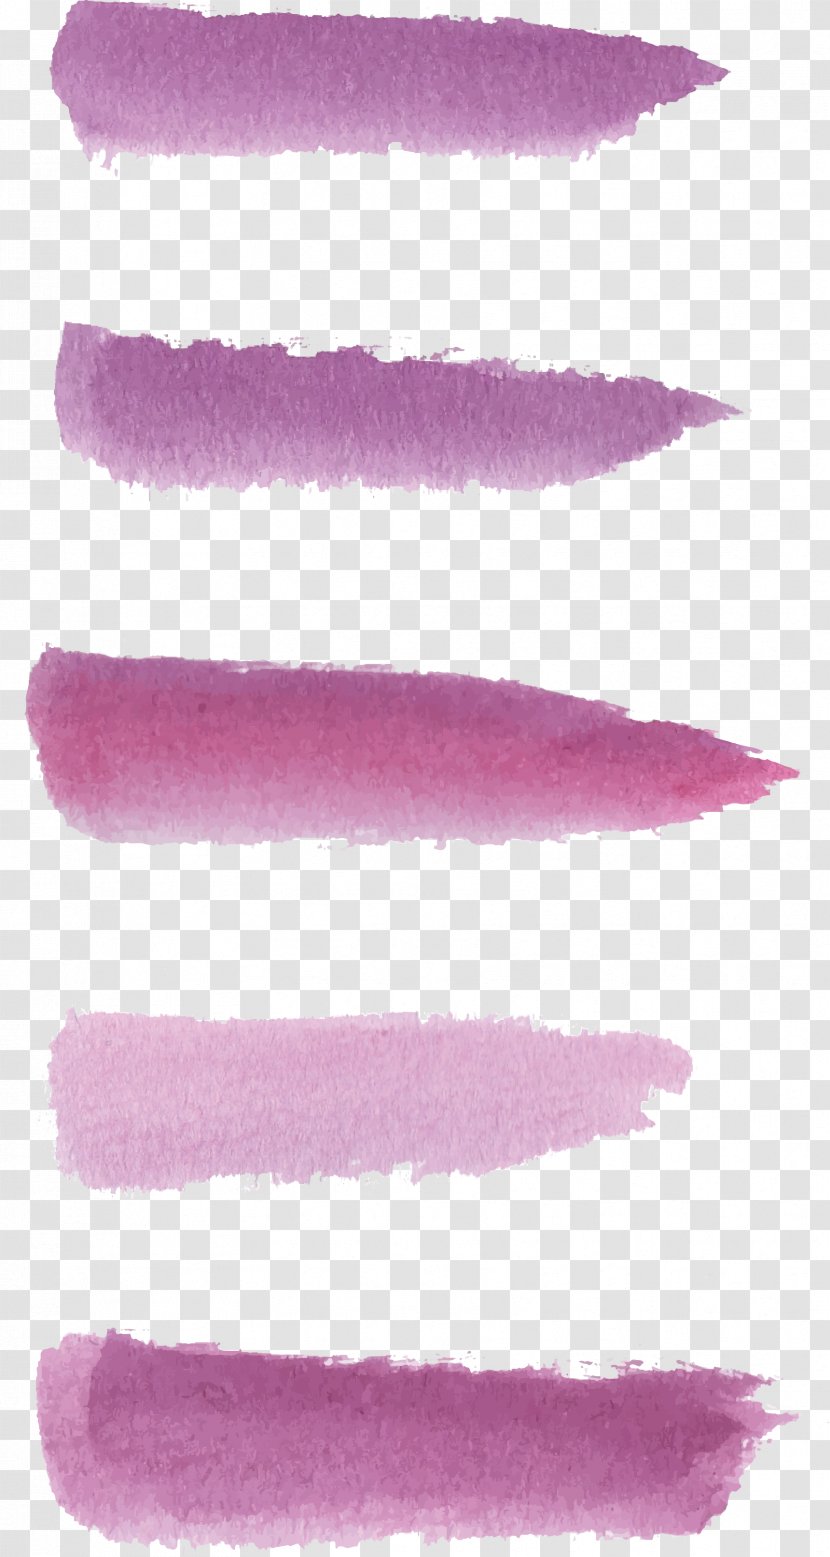 Watercolor Painting Art Stain Pincelada - Lipstick Transparent PNG